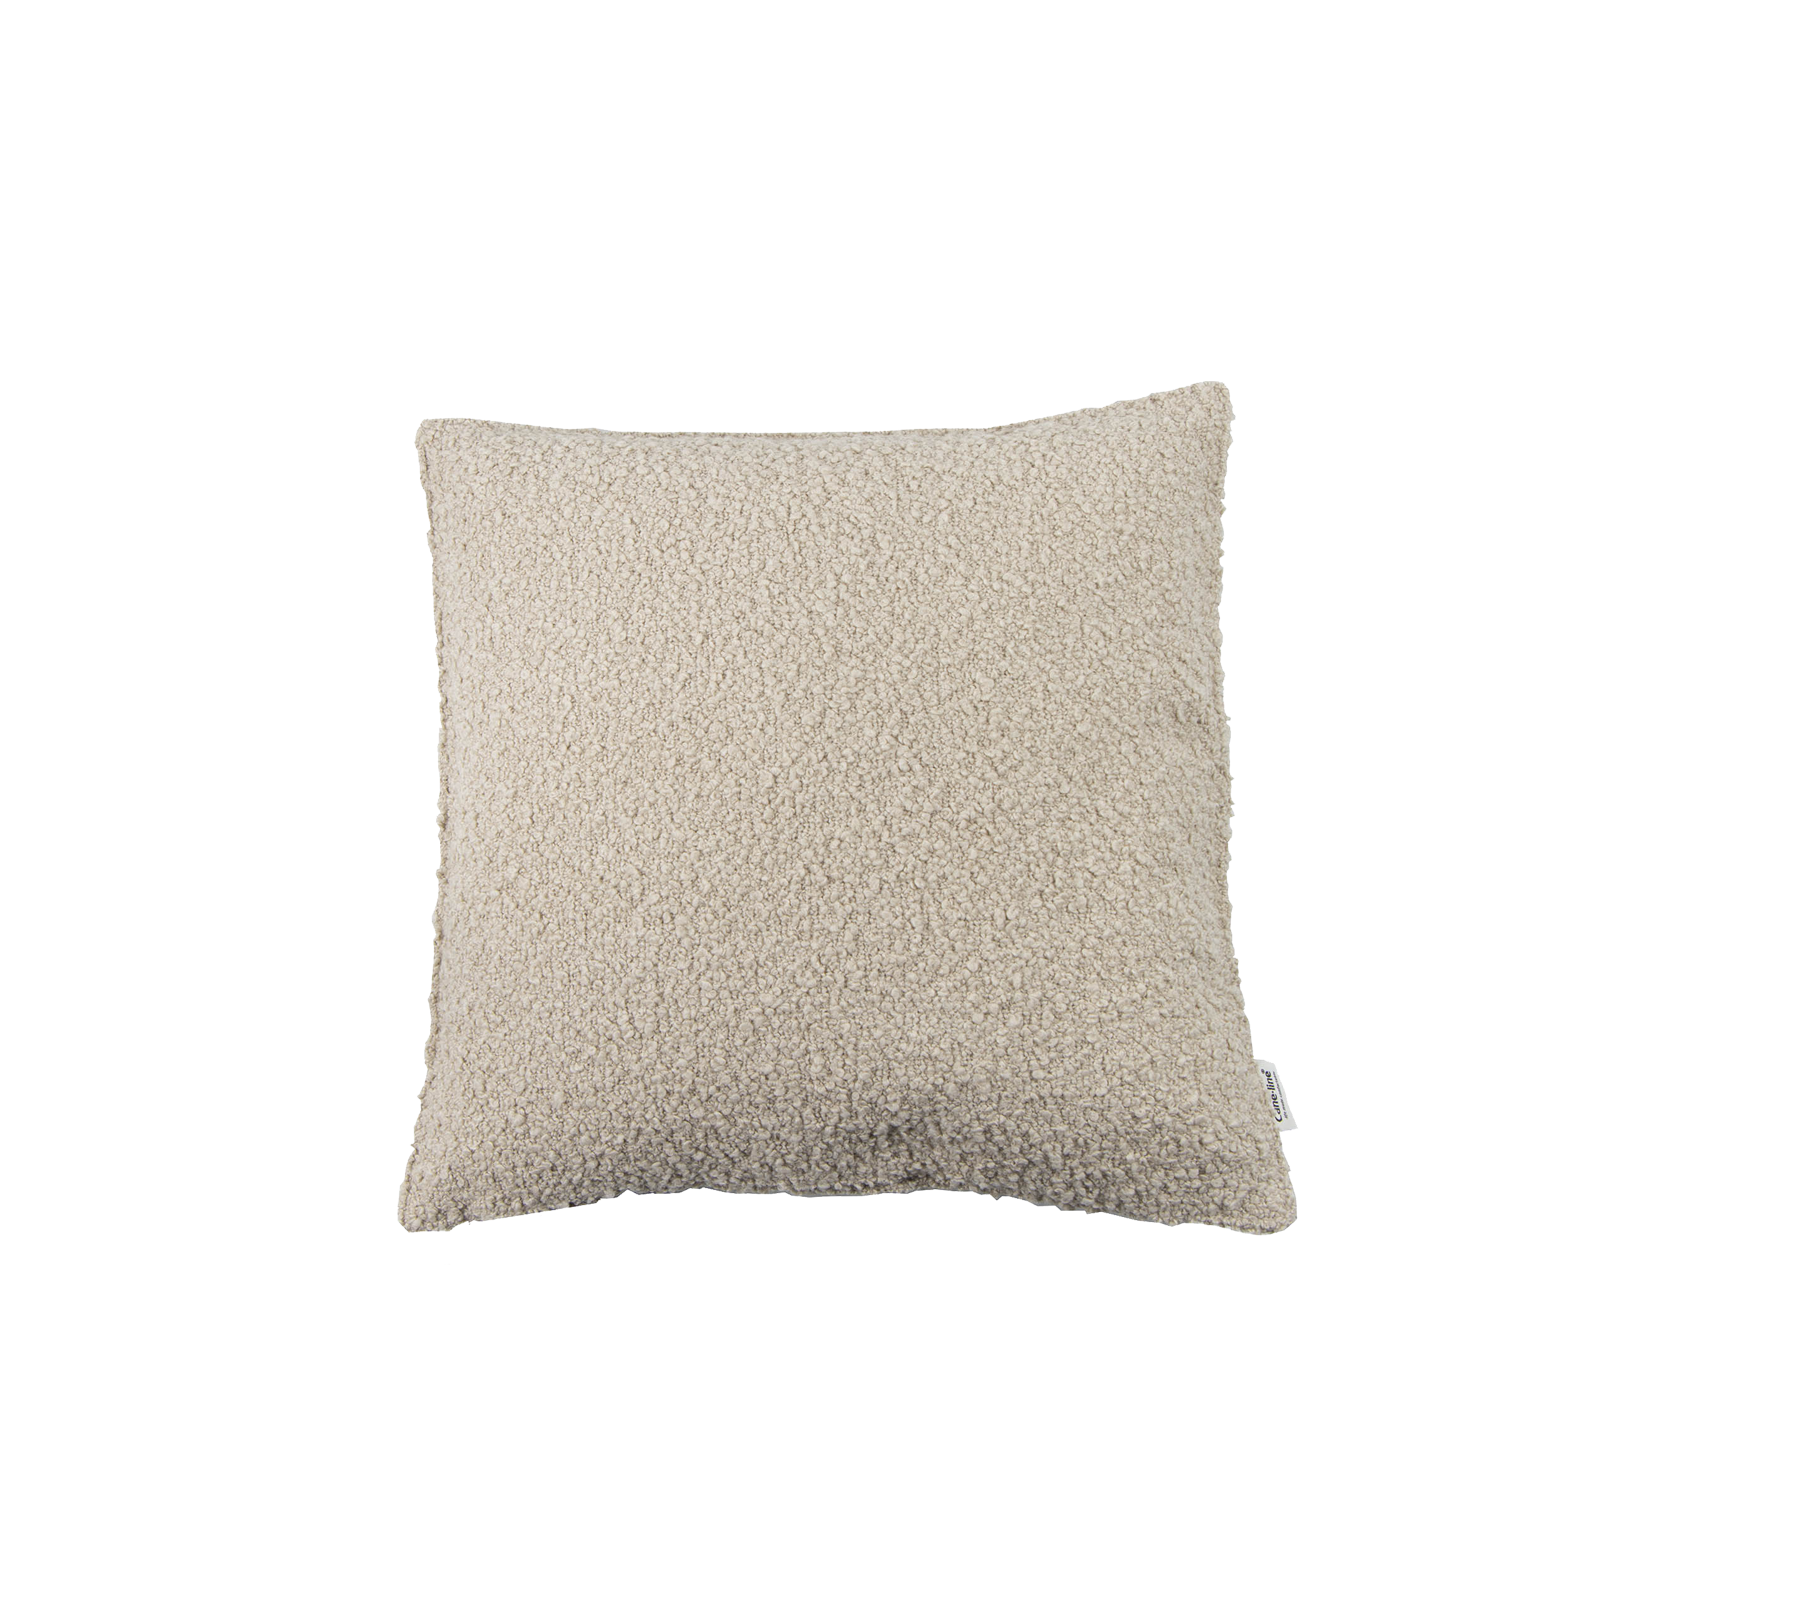 Cane-line - Scent scatter cushion, 50x50 cm - SCI50X50Y150X